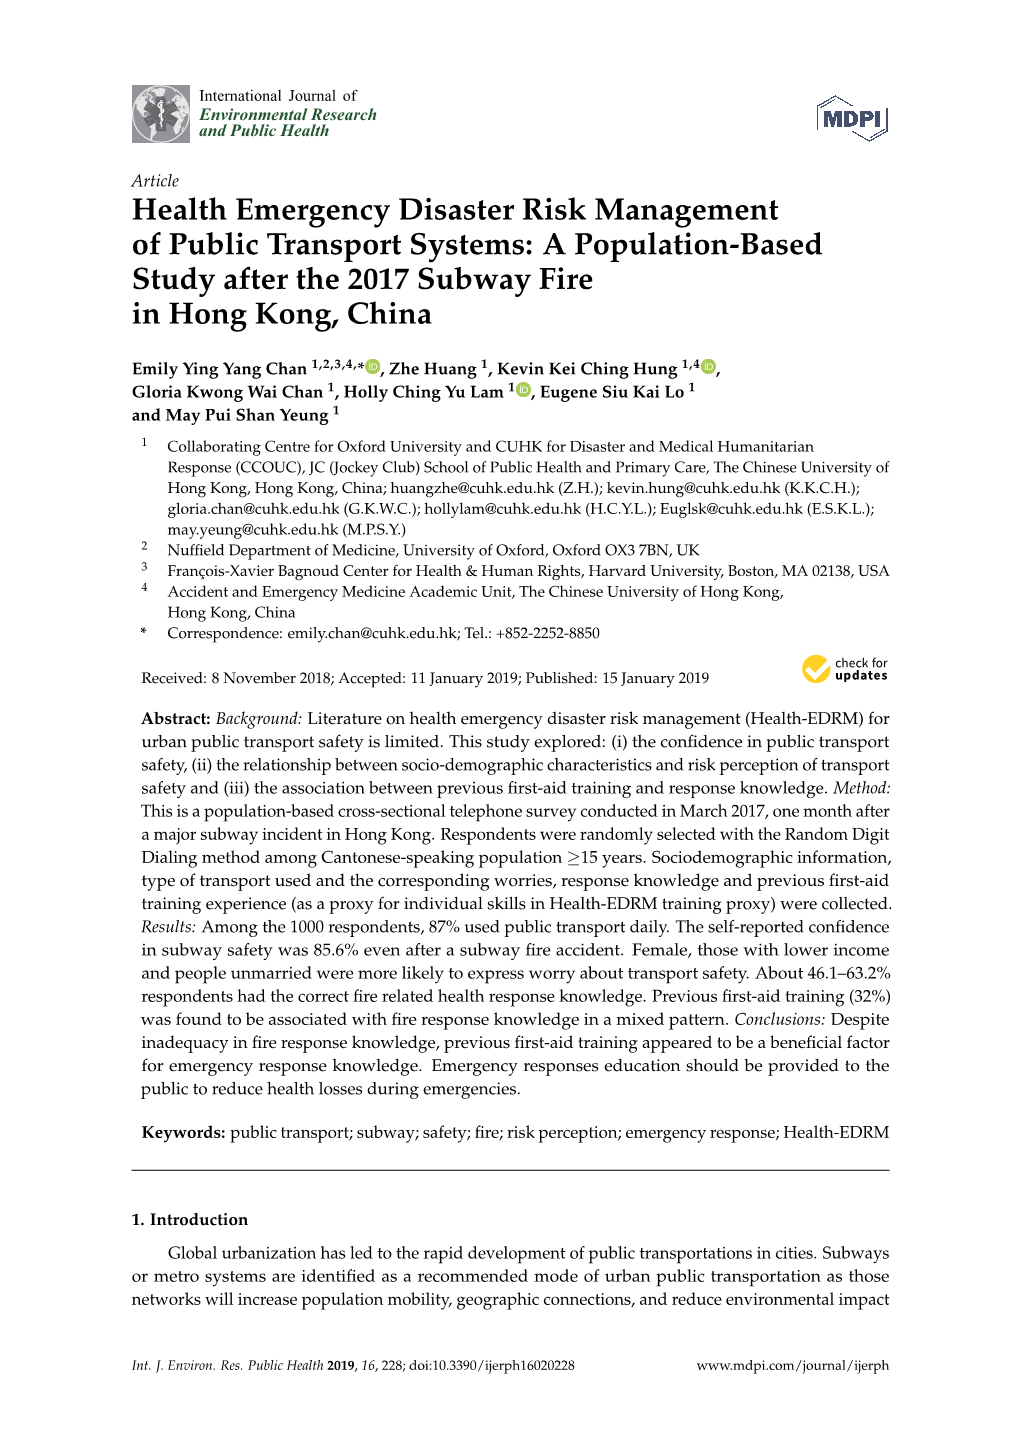 Health Emergency Disaster Risk Management of Public Transport Systems: a Population-Based Study After the 2017 Subway Fire in Hong Kong, China